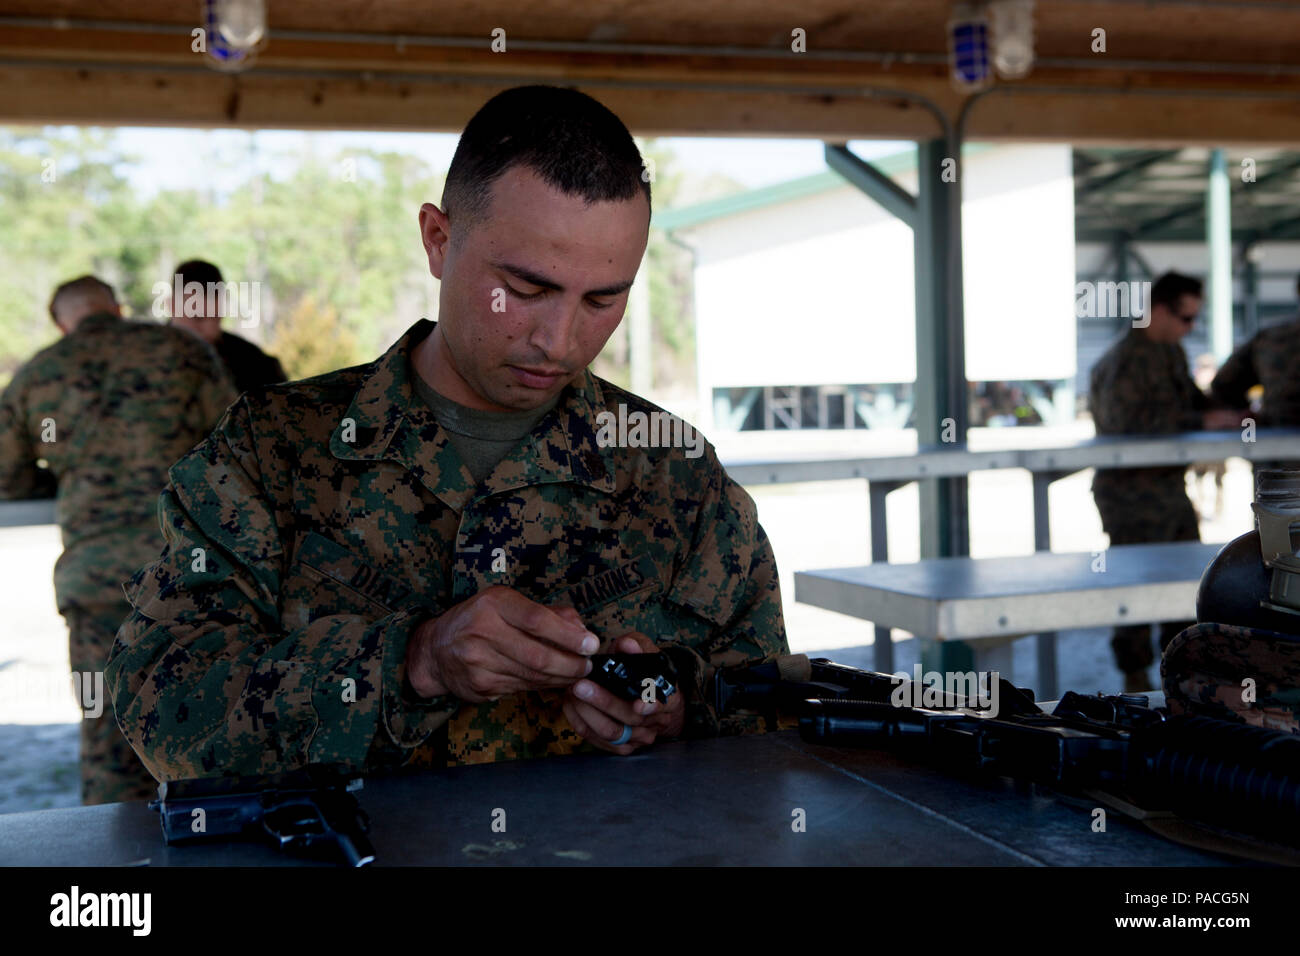 U.S. Marine Staff Sgt. Felix Diaz, a combat instructor with the School of Infantry-East, disassembles his M9 pistol during the Combat Instructor Stakes on Camp Lejeune, N.C., March 16, 2015. The School of Infantry-East hosted the Combat Instructor Stakes, which is a grueling 30-hour competition that pits two man teams against each other, competing in physical, tactical and knowledge based events while carrying a combat load and moving over 50 kilometers on foot. (U.S. Marine Corps photo by Lance Cpl. Jose Villalobosrocha) Stock Photo